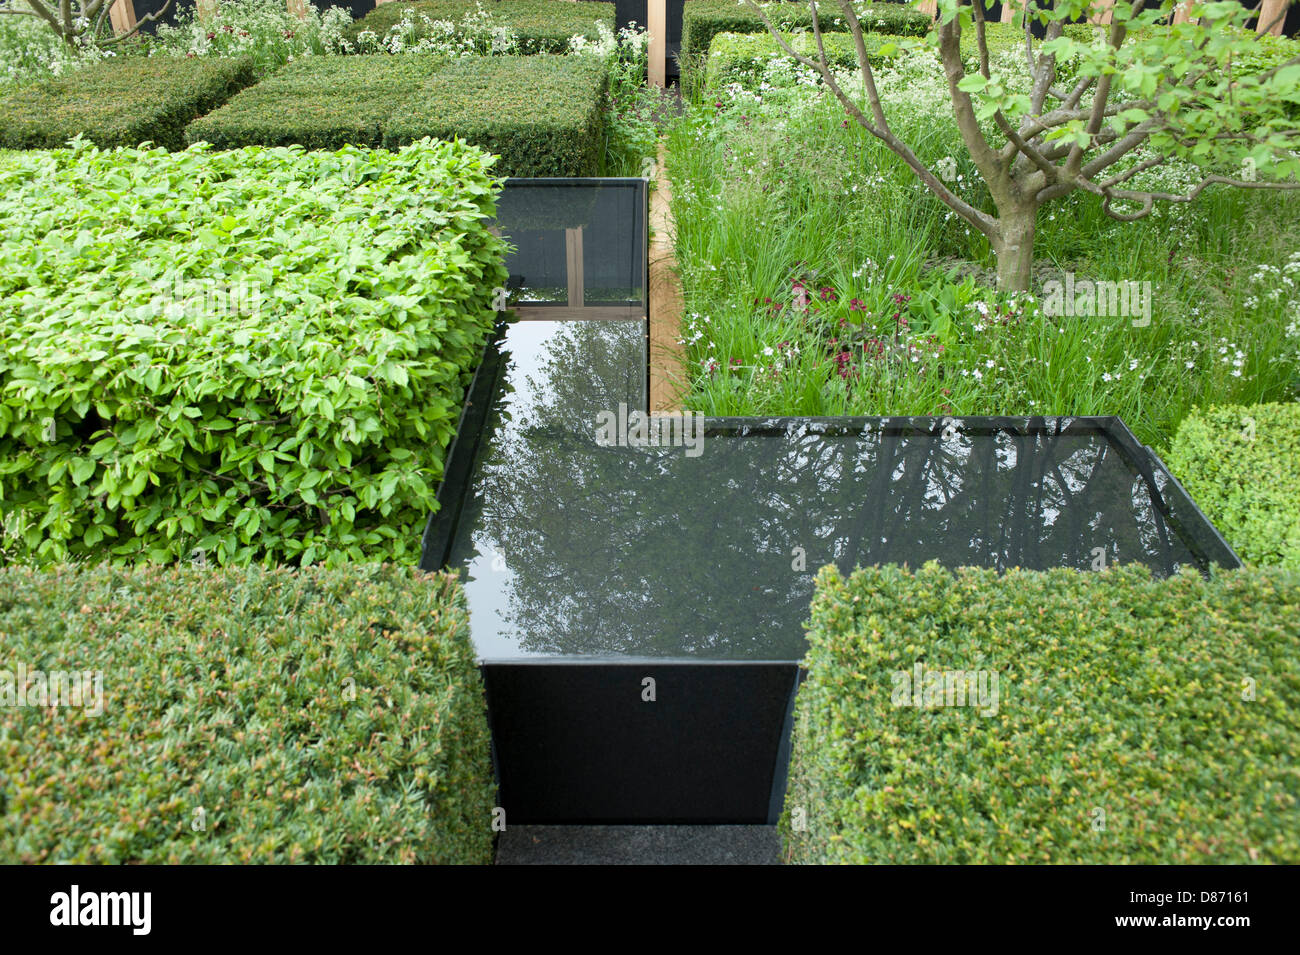 London, UK. 20th May 2013. The Daily Telegraph Garden designed by Christopher Bradley-Hole at the RHS Chelsea Flower Show, awarded a Gold Medal. Credit:  Malcolm Park / Alamy Live News Stock Photo